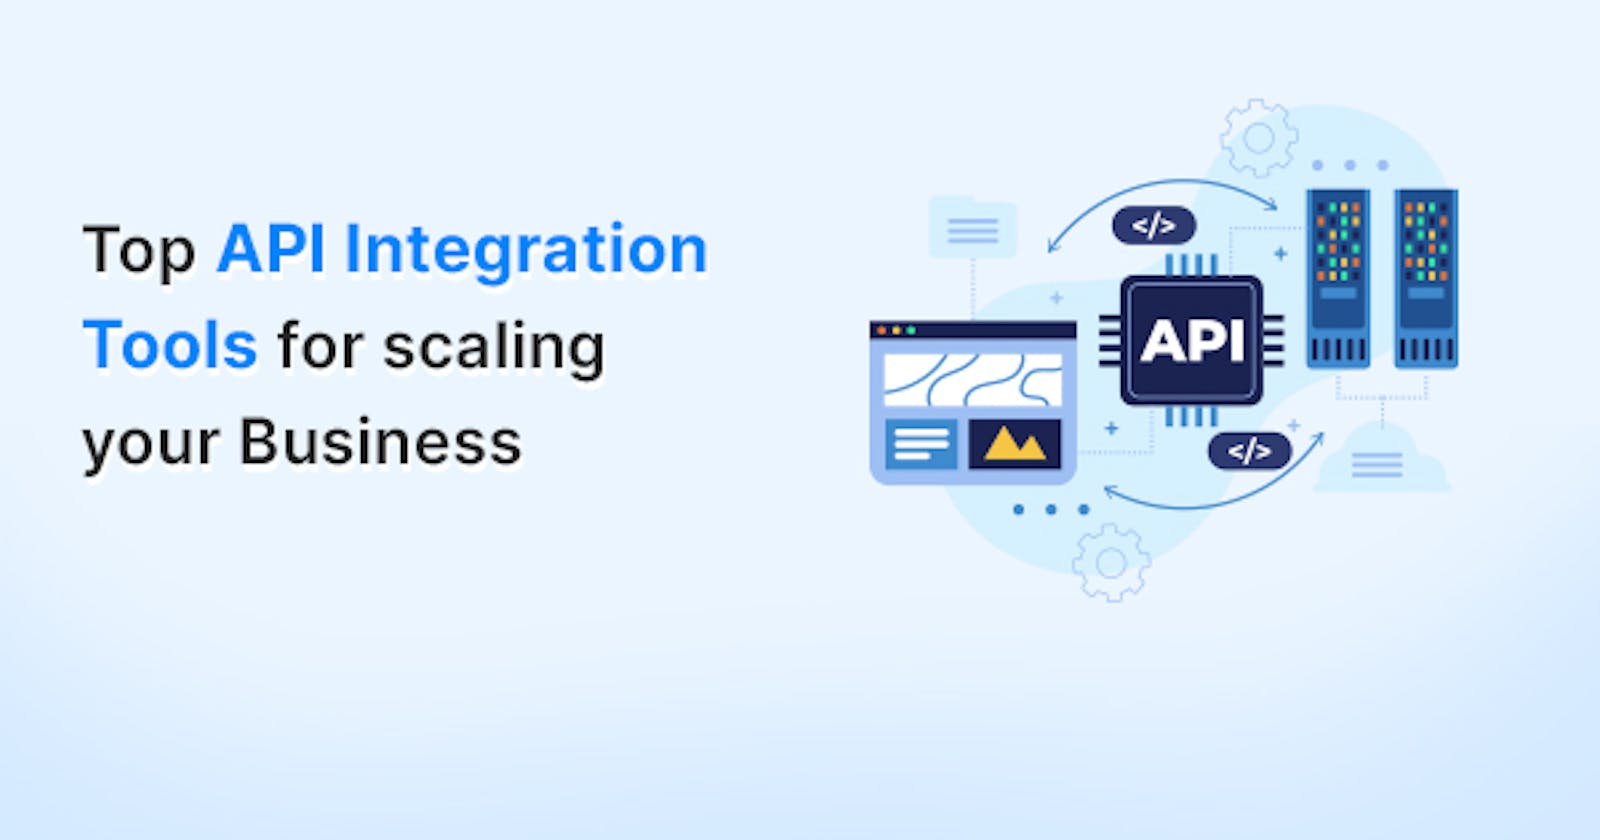 Top API Integration Tools for Scaling Business